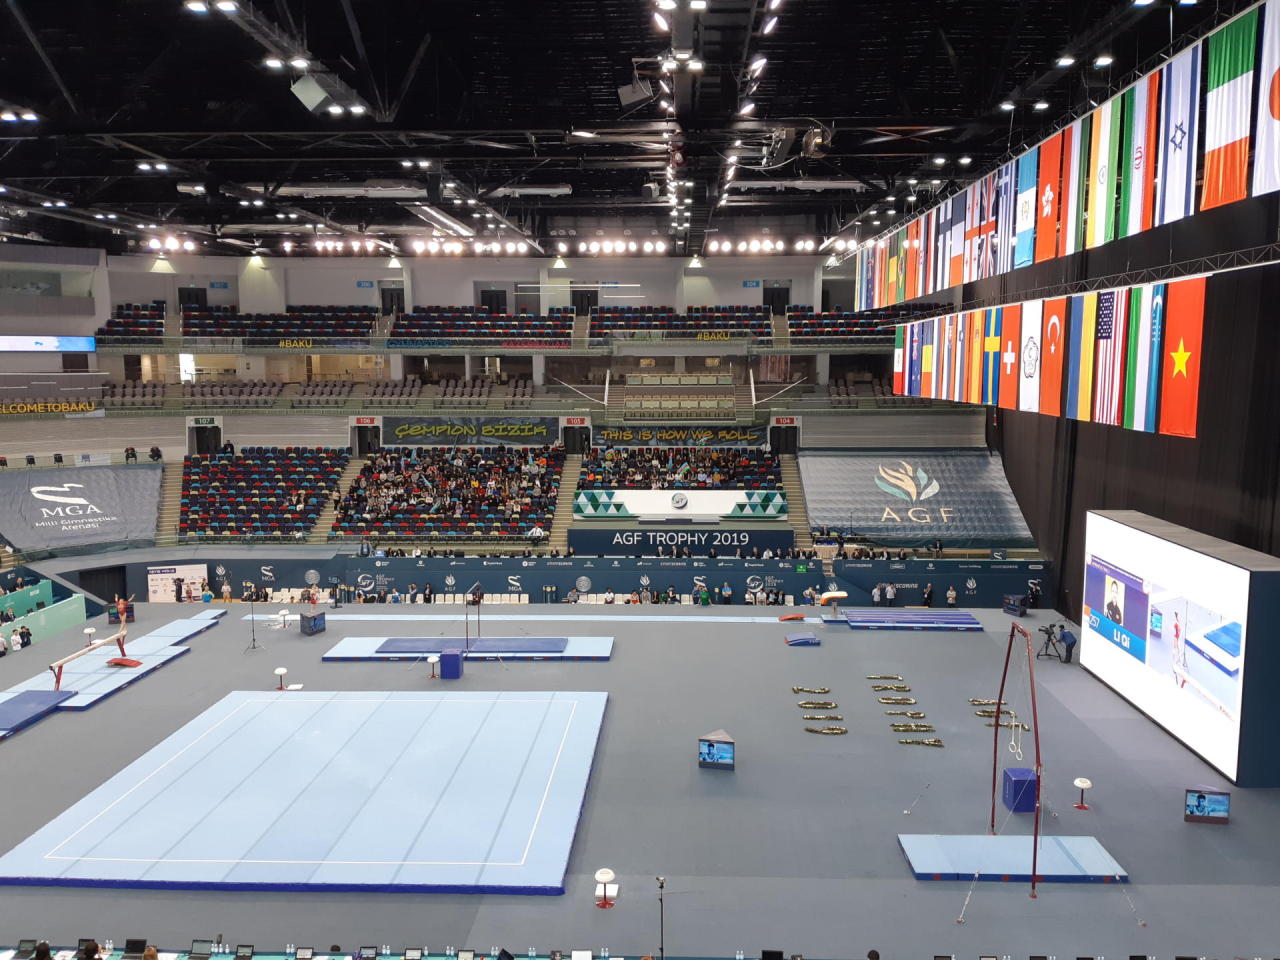 Winners of FIG Artistic Gymnastics World Cup in horizontal bar exercises named